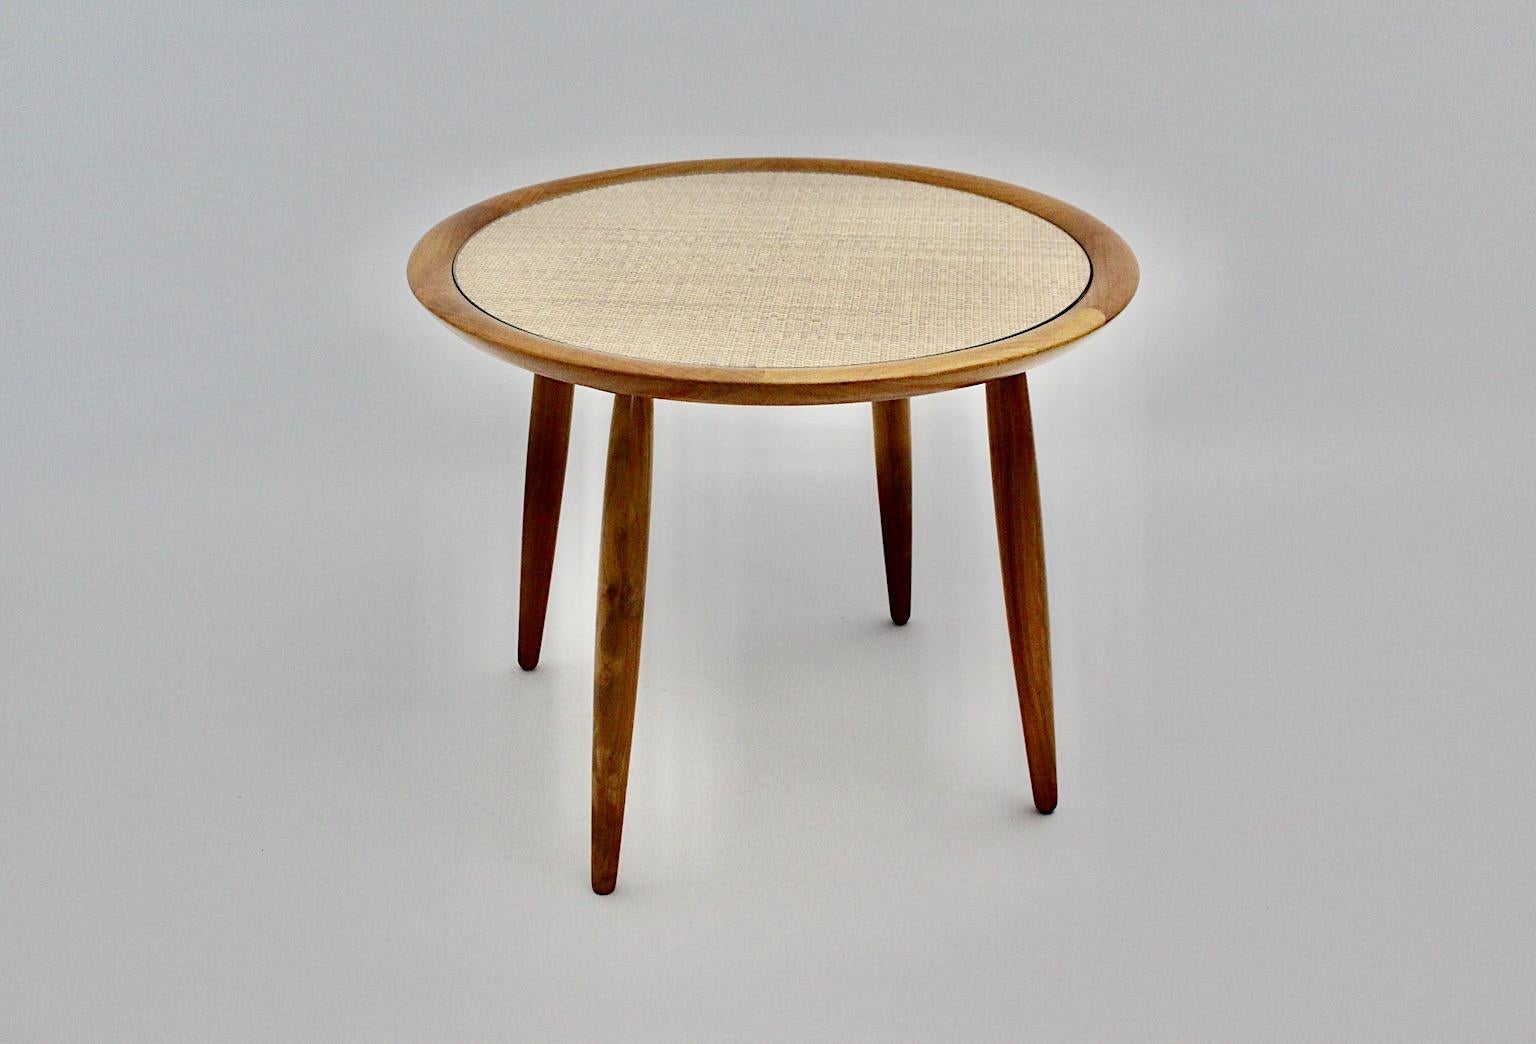 Mid-20th Century Mid-Century Modern Vintage Cherry Coffee Table Side Table May Kment 1949 Austria For Sale